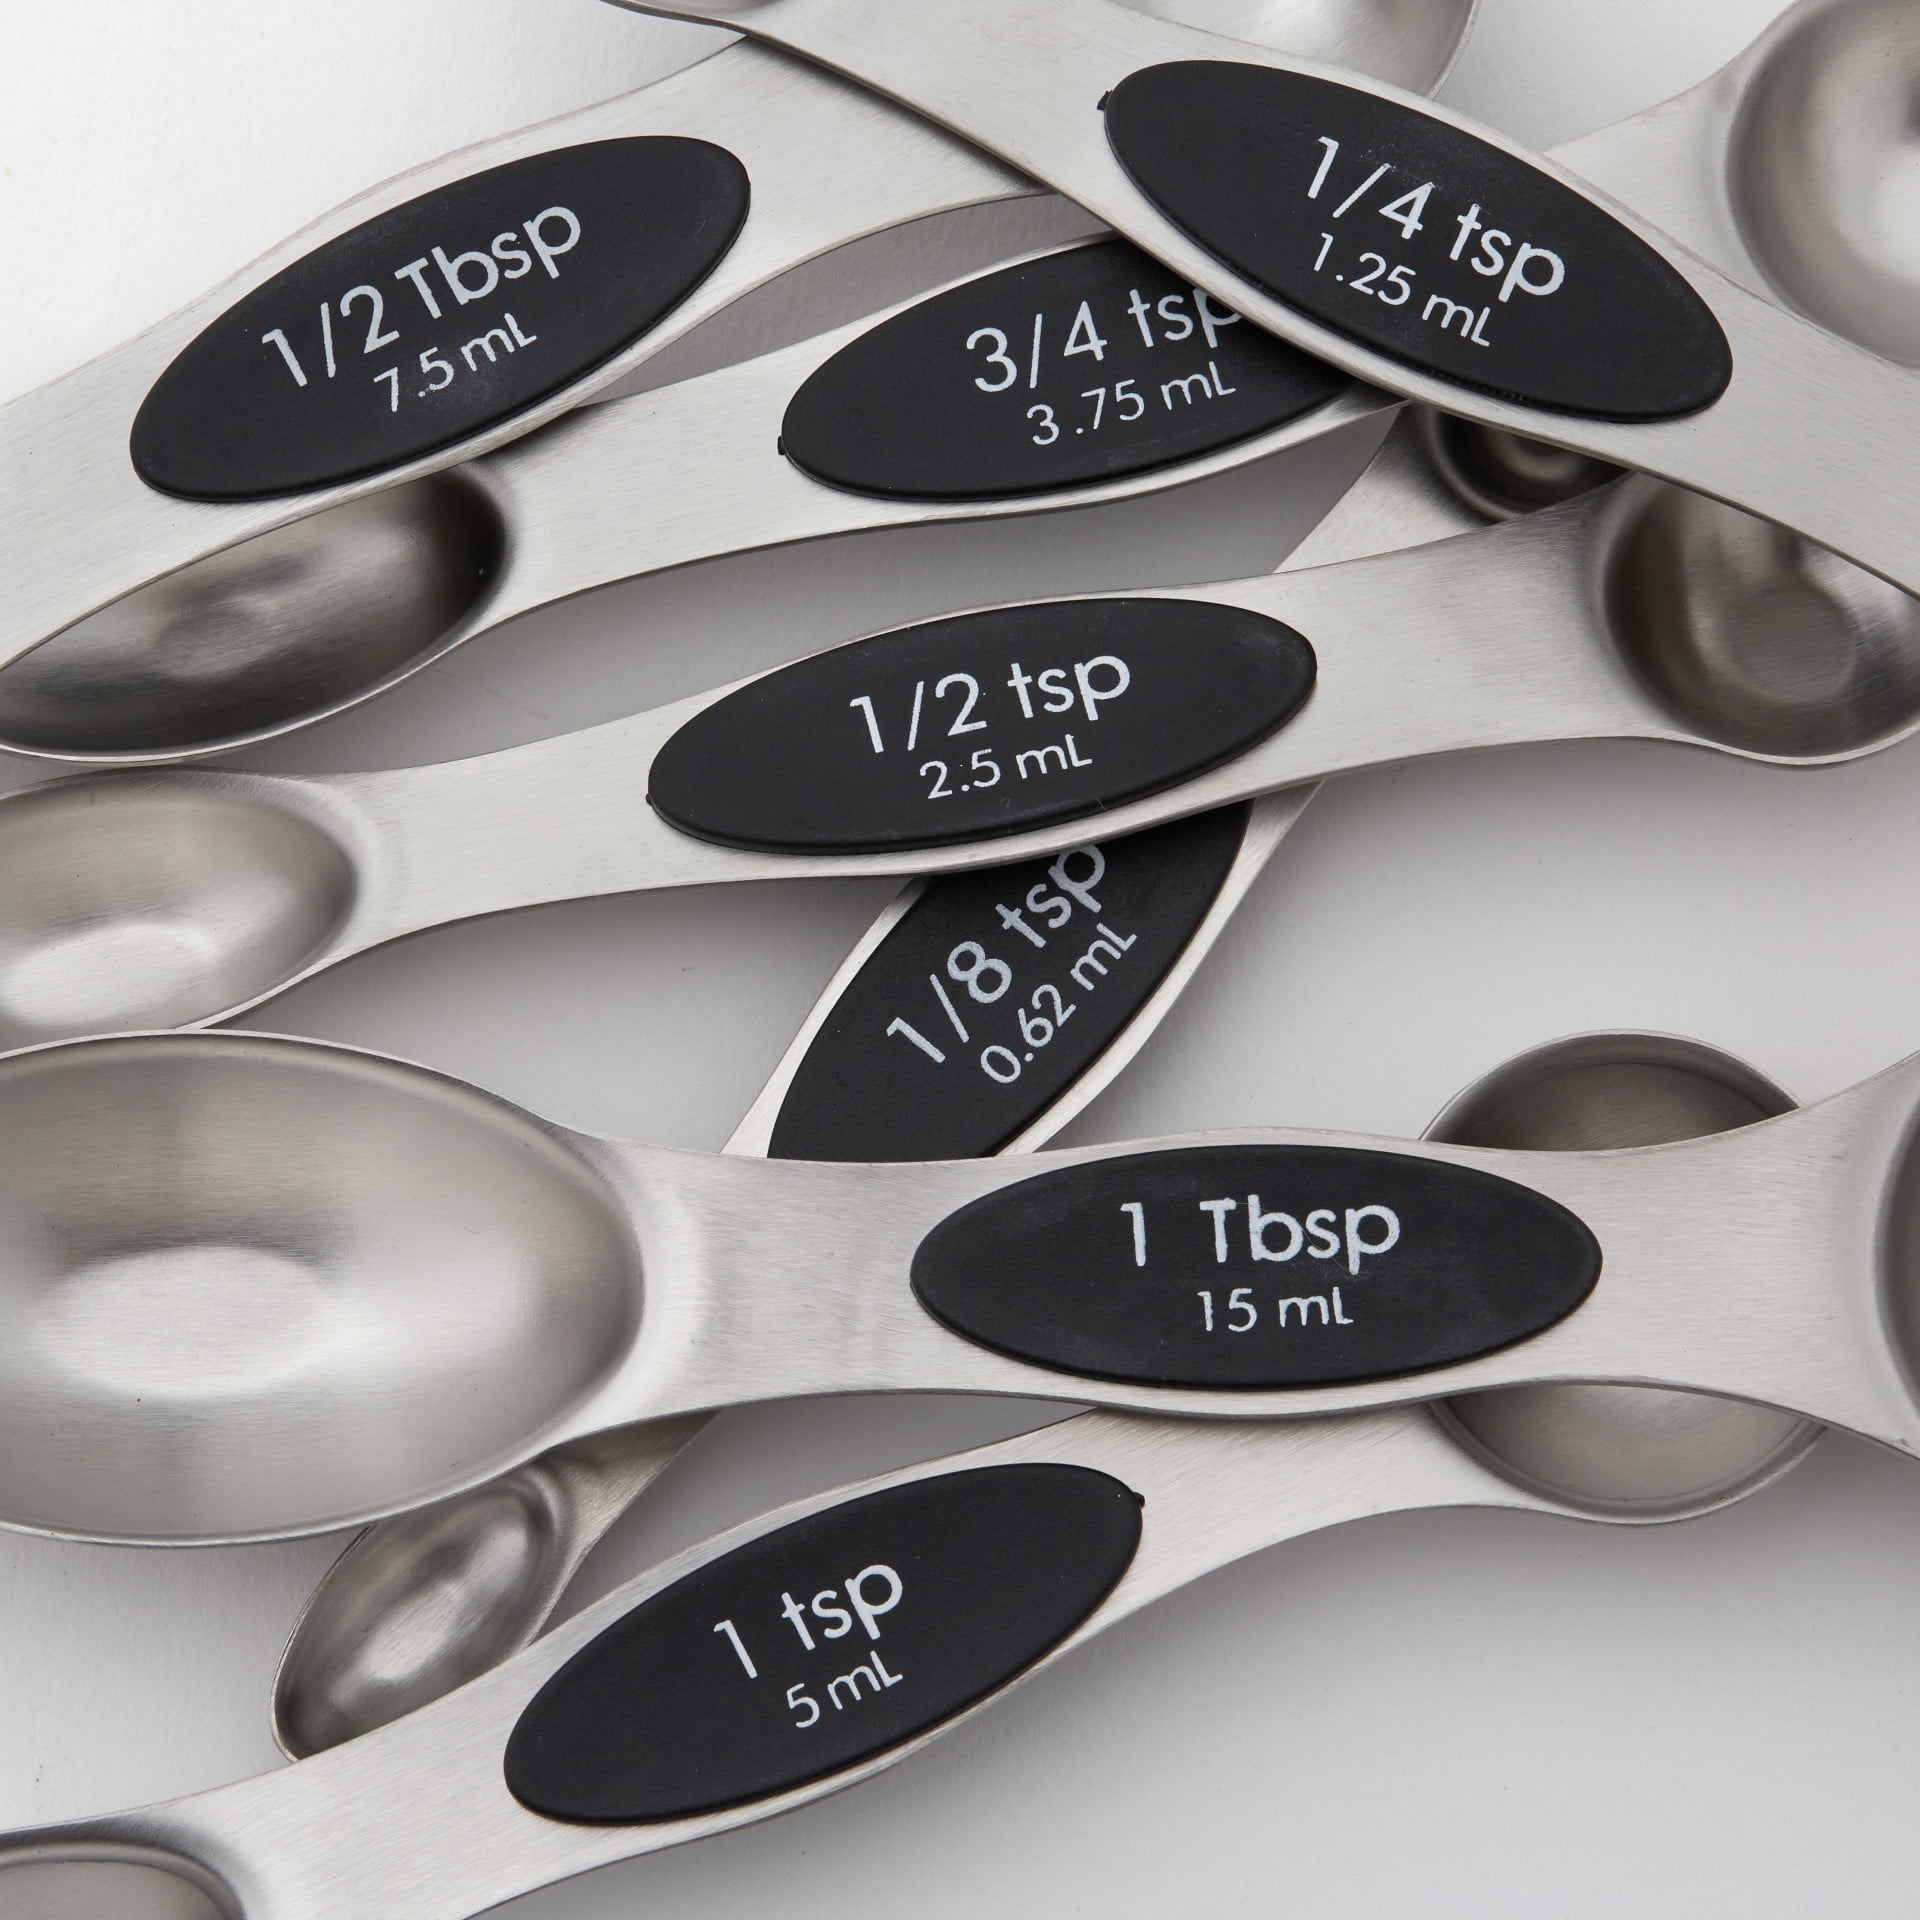 Mrs. Anderson's Baking Dual-Sided Magnetic Measuring Spoons with Level -  Bear Claw Knife & Shear